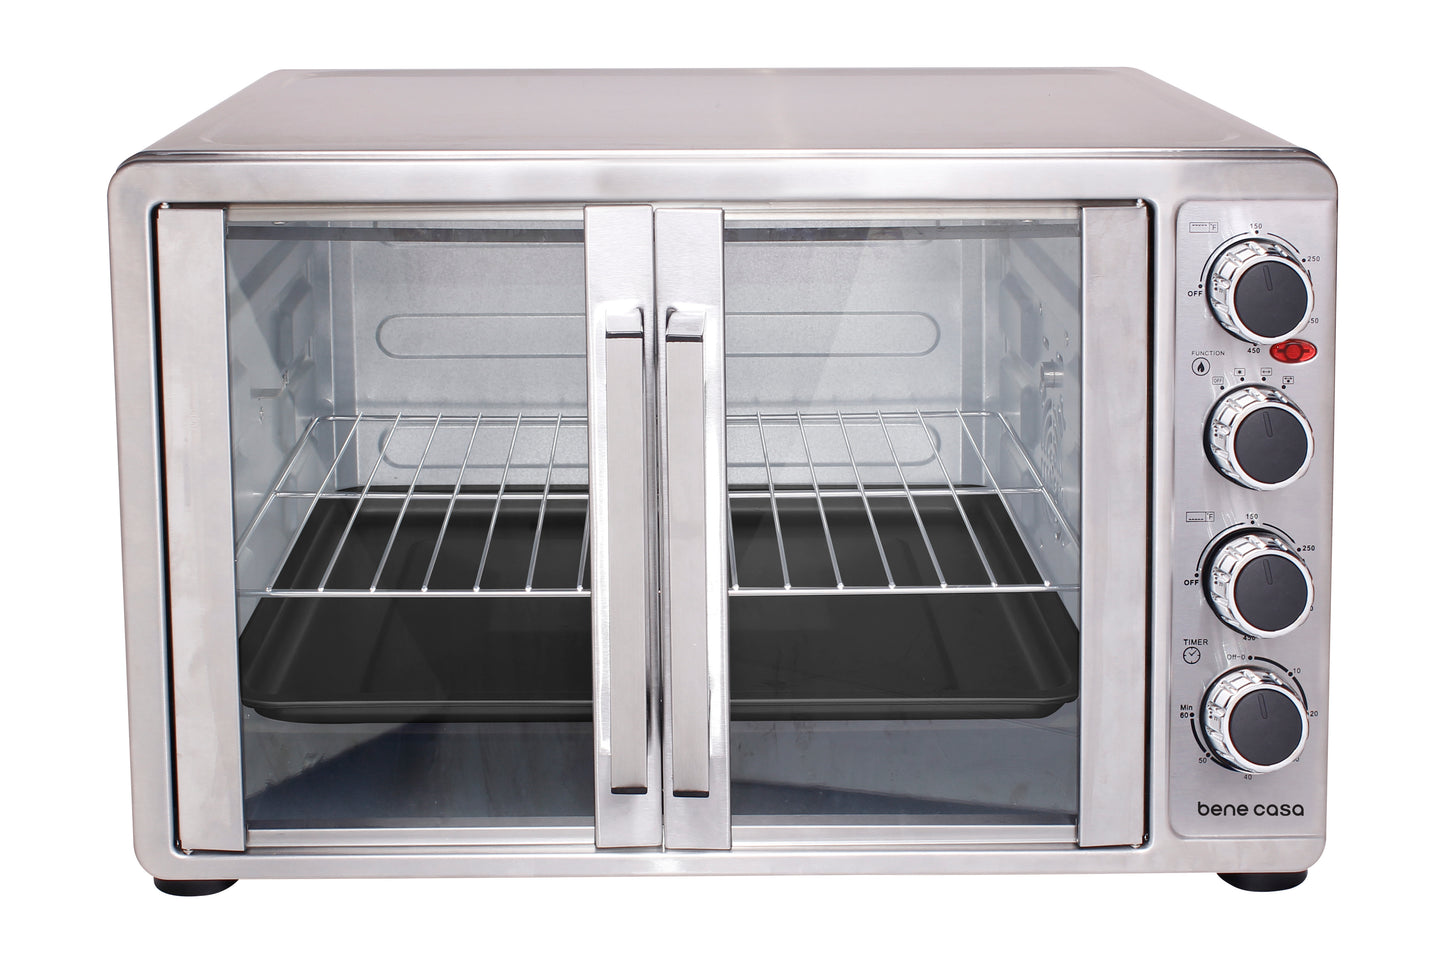 
                  
                    Bene Casa 45L French Door Convection Oven w/ rotisserie, Stainless Steel
                  
                